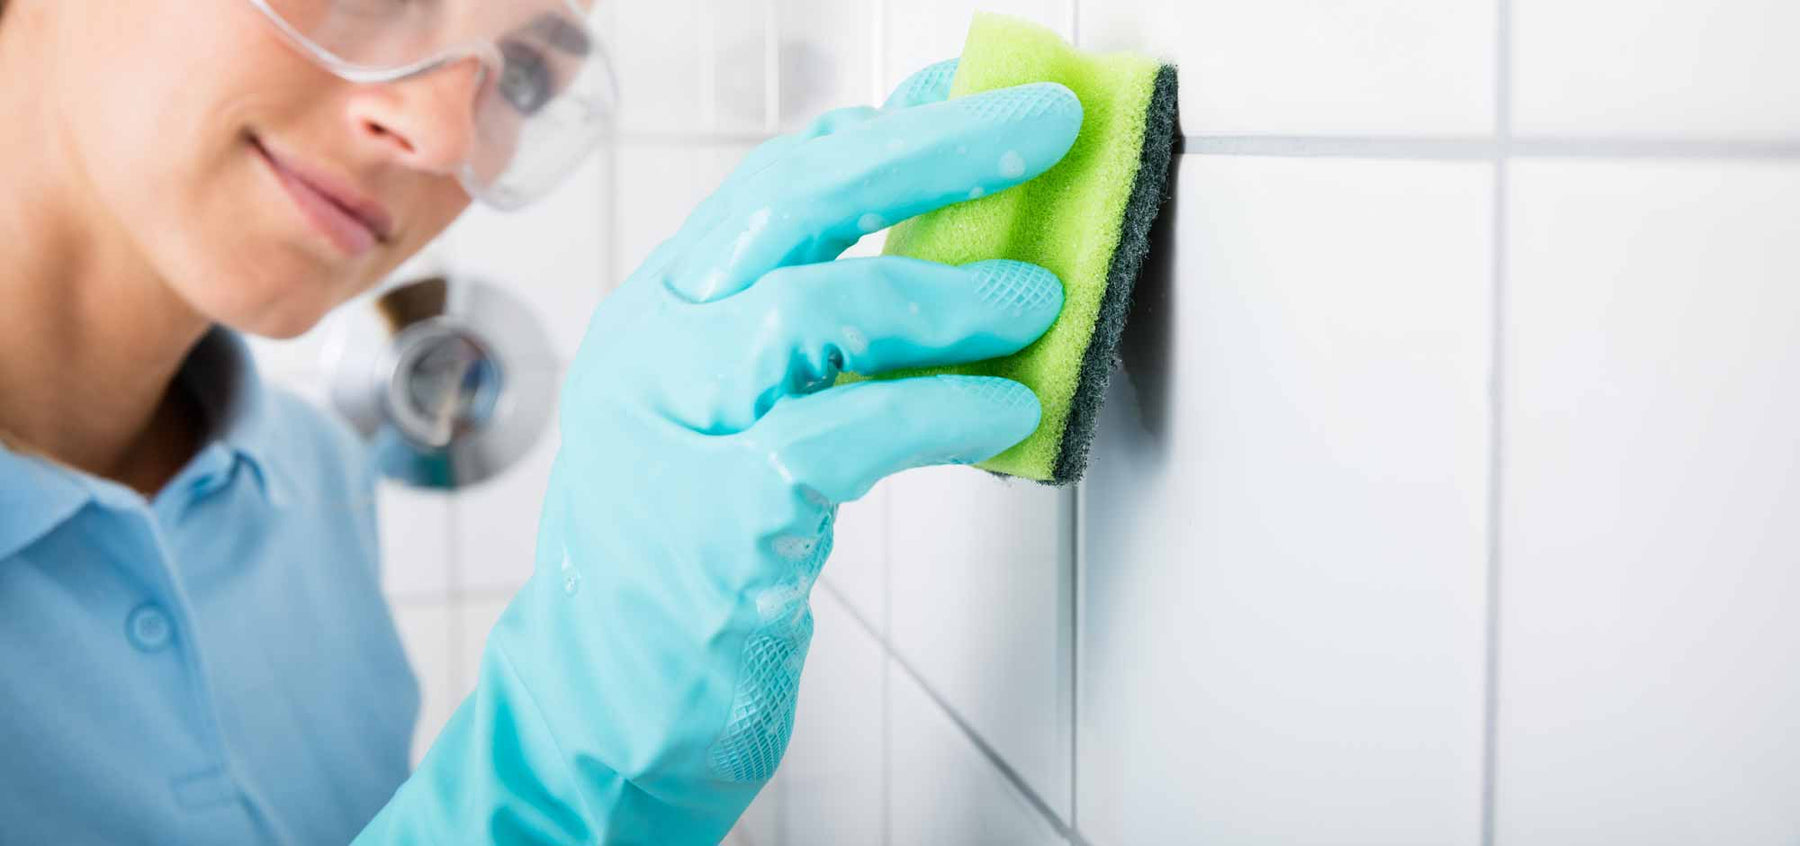 cleaning a white wall tile with a sponge and rubber gloves